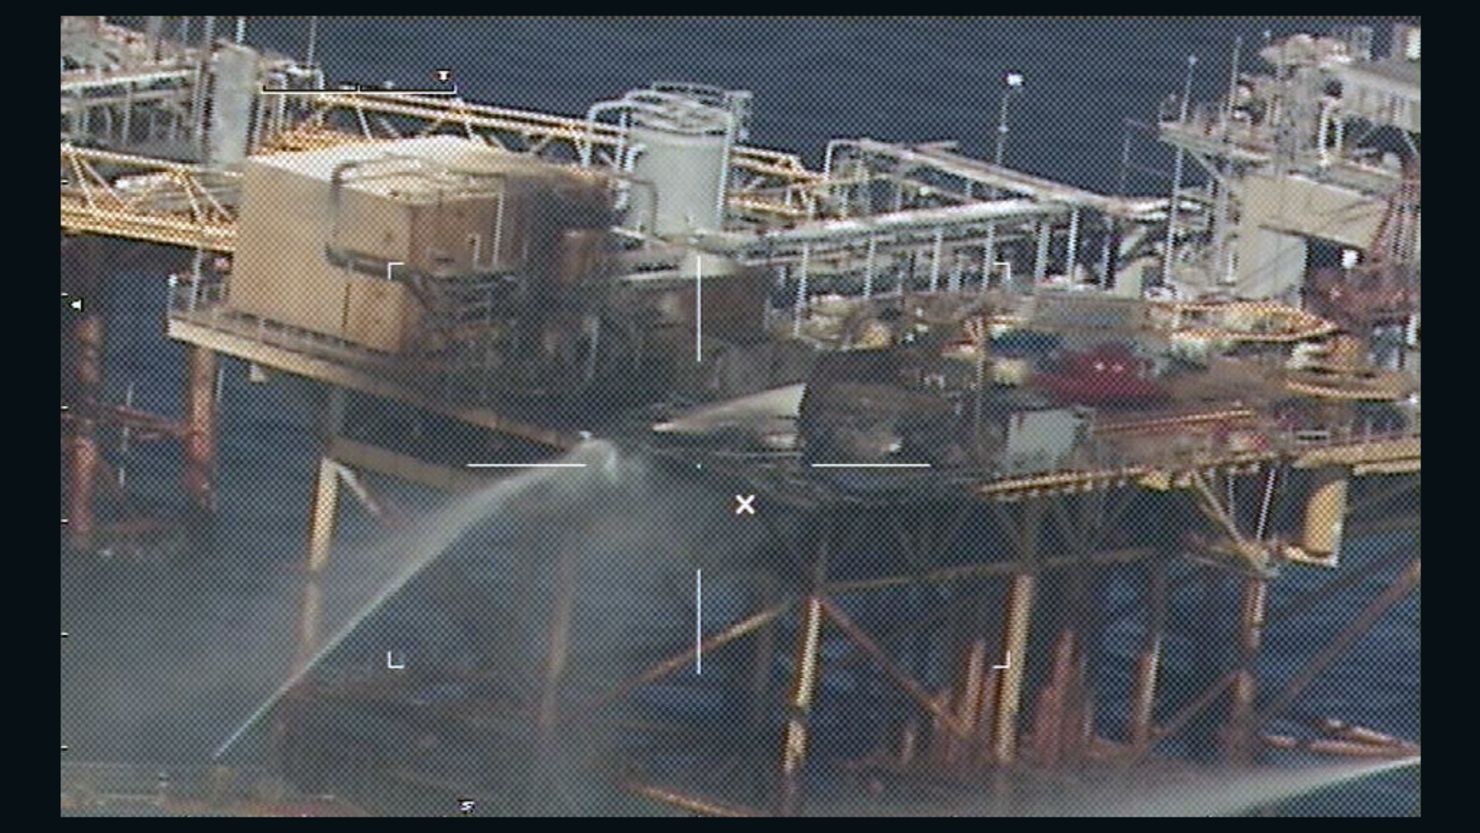 Commercial vessels extinguish a fire on board an oil platform approximately 20 miles off the coast of Grand Isle, Louisiana.